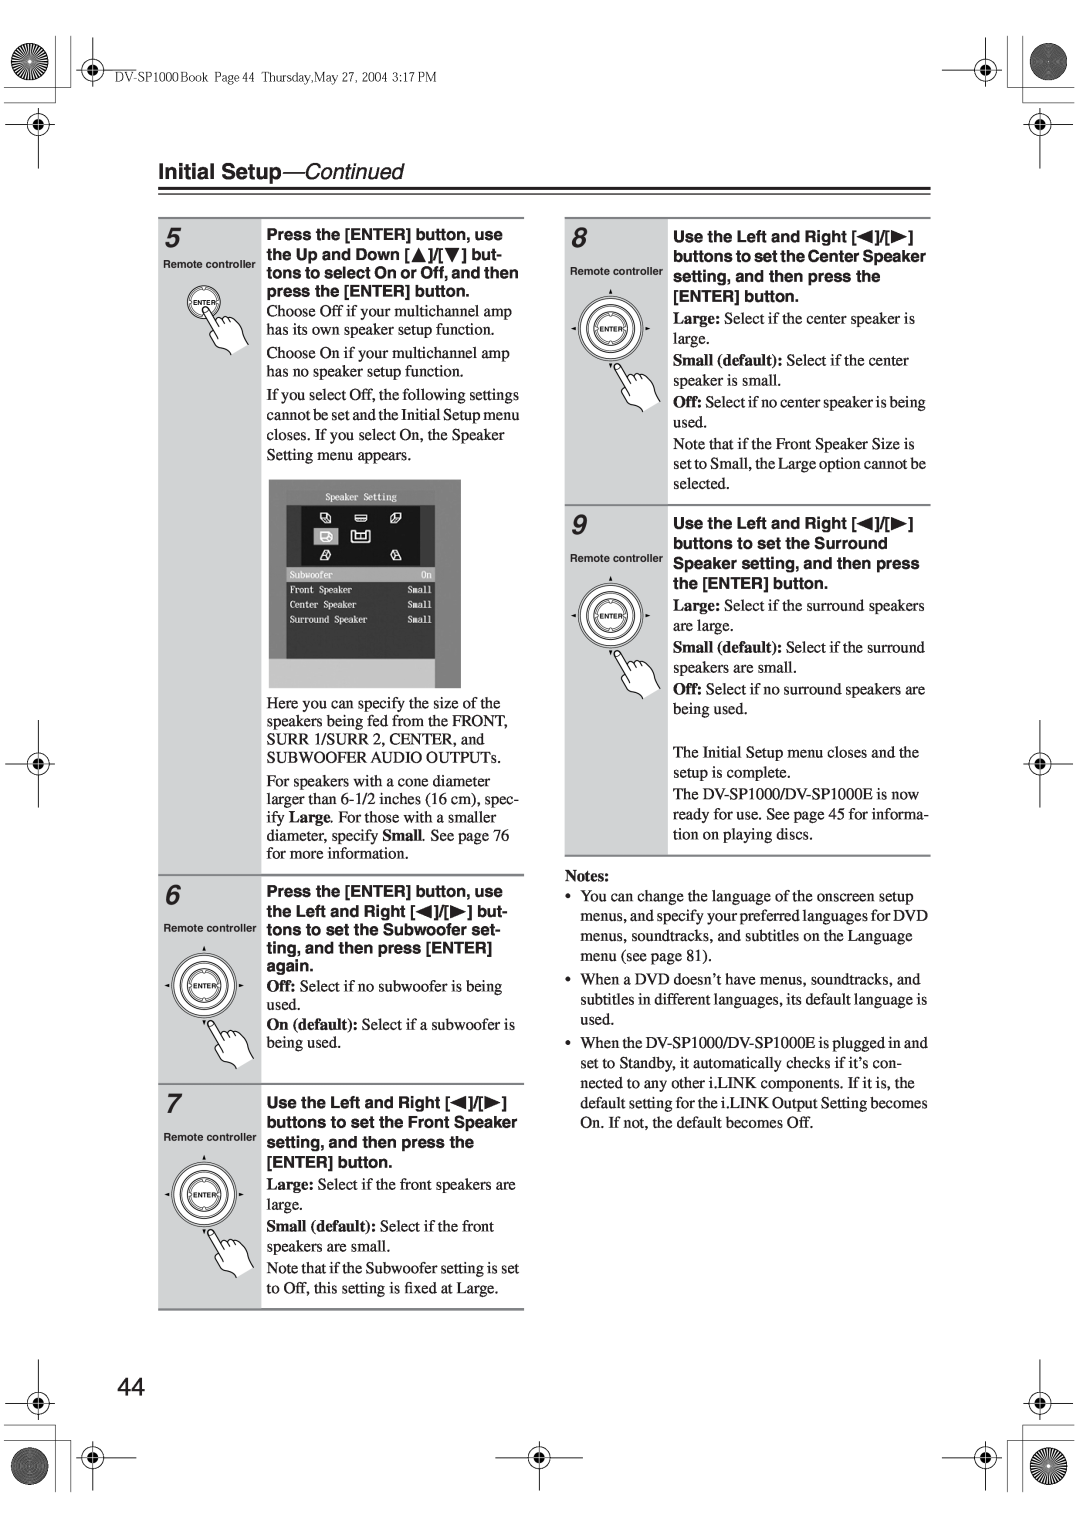 Onkyo DV-SP1000E instruction manual Initial Setup—Continued, Large: Select if the center speaker is, large 